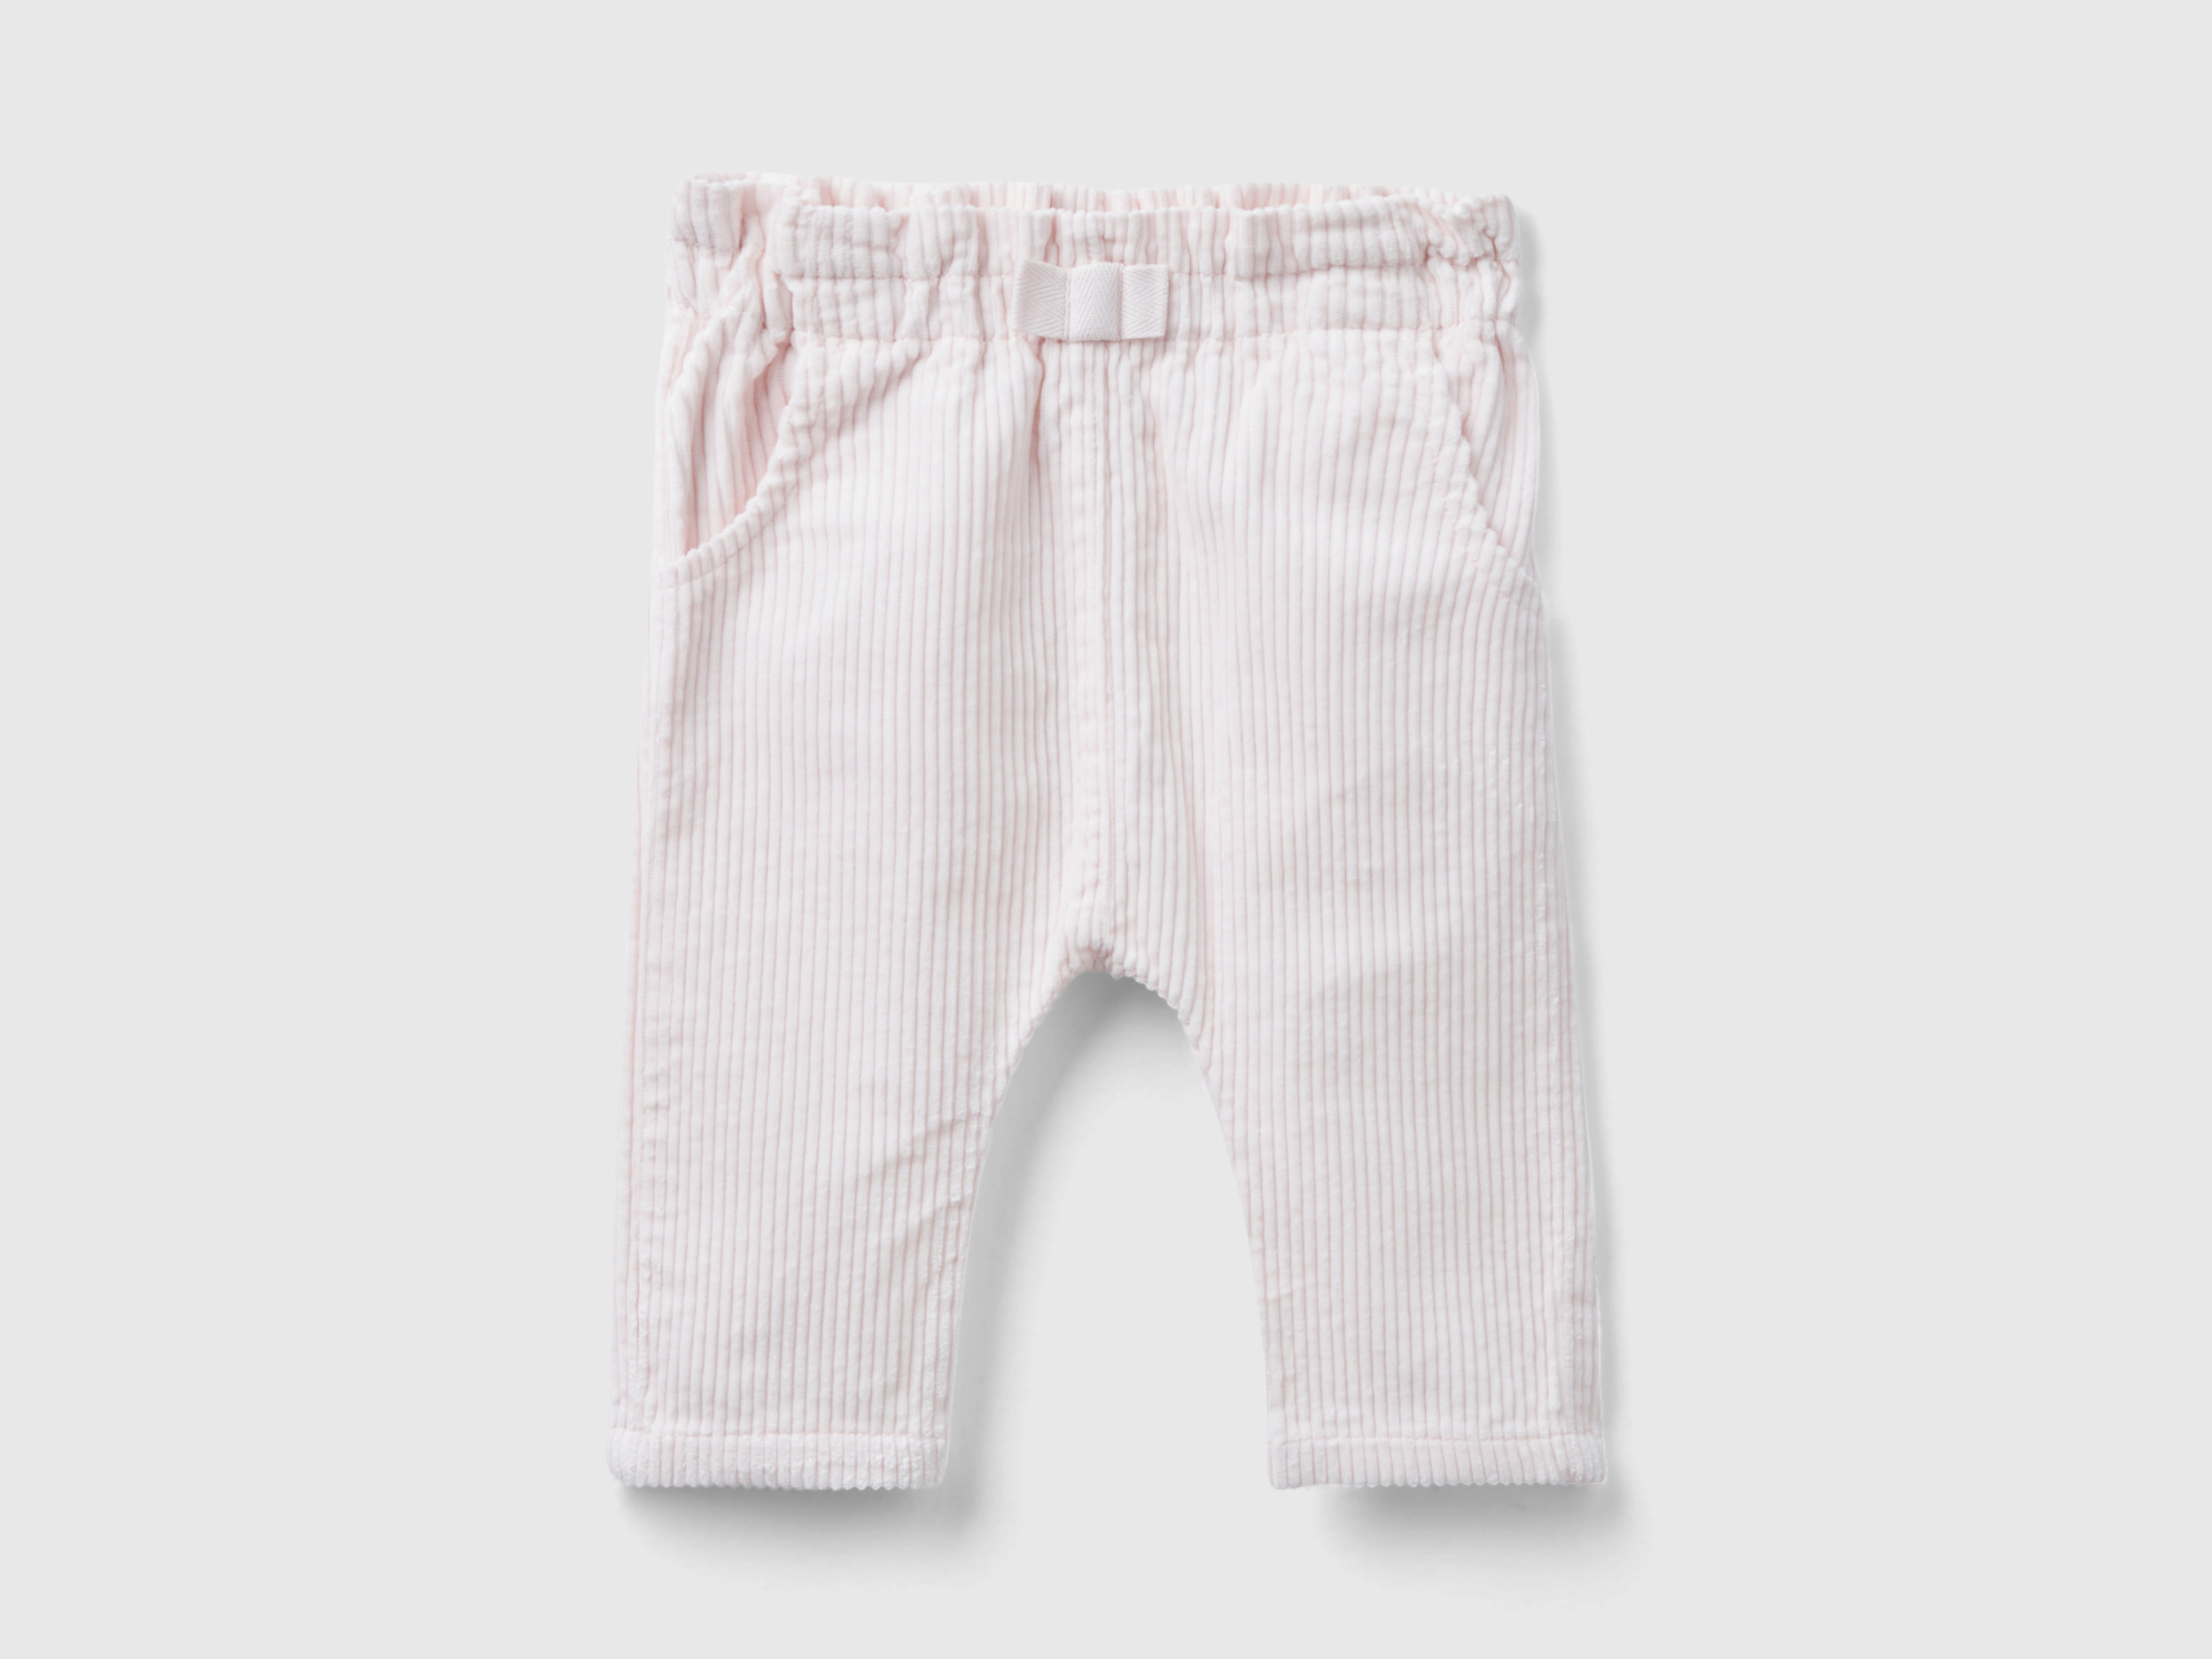 Benetton, Paperbag Corduroy Trousers, size 1-3, Soft Pink, Kids